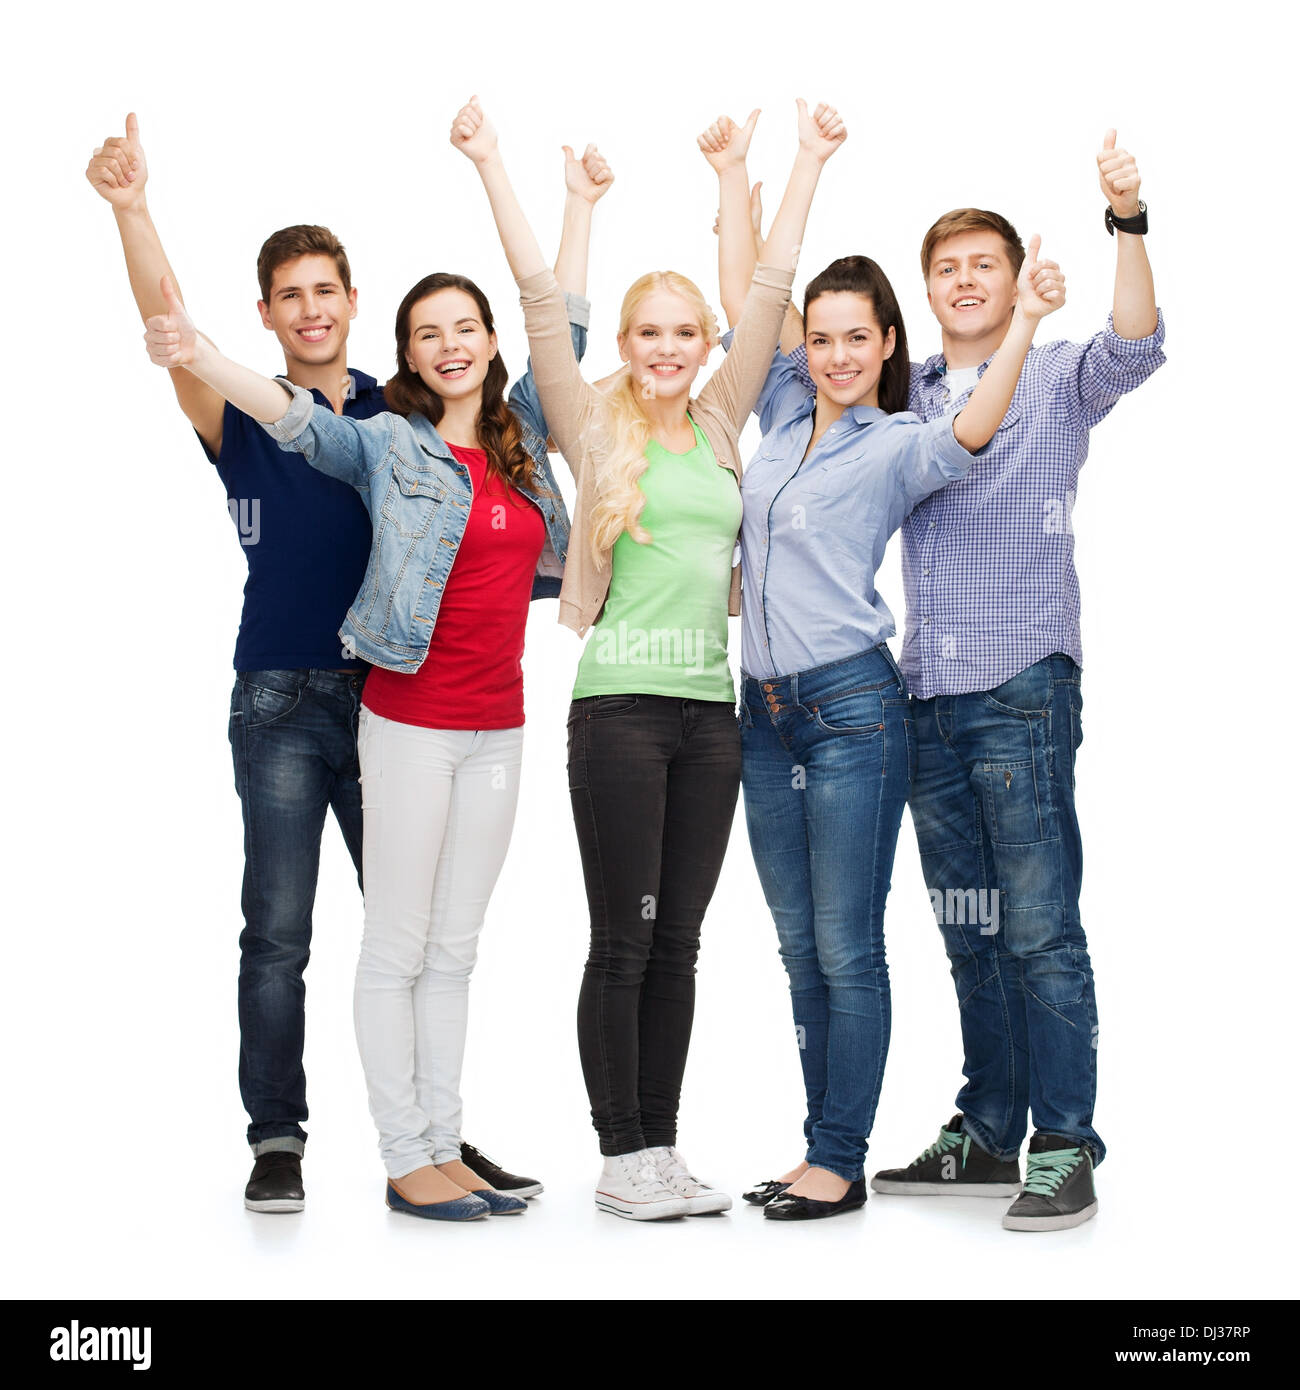 group of smiling students showing thumbs up Stock Photo